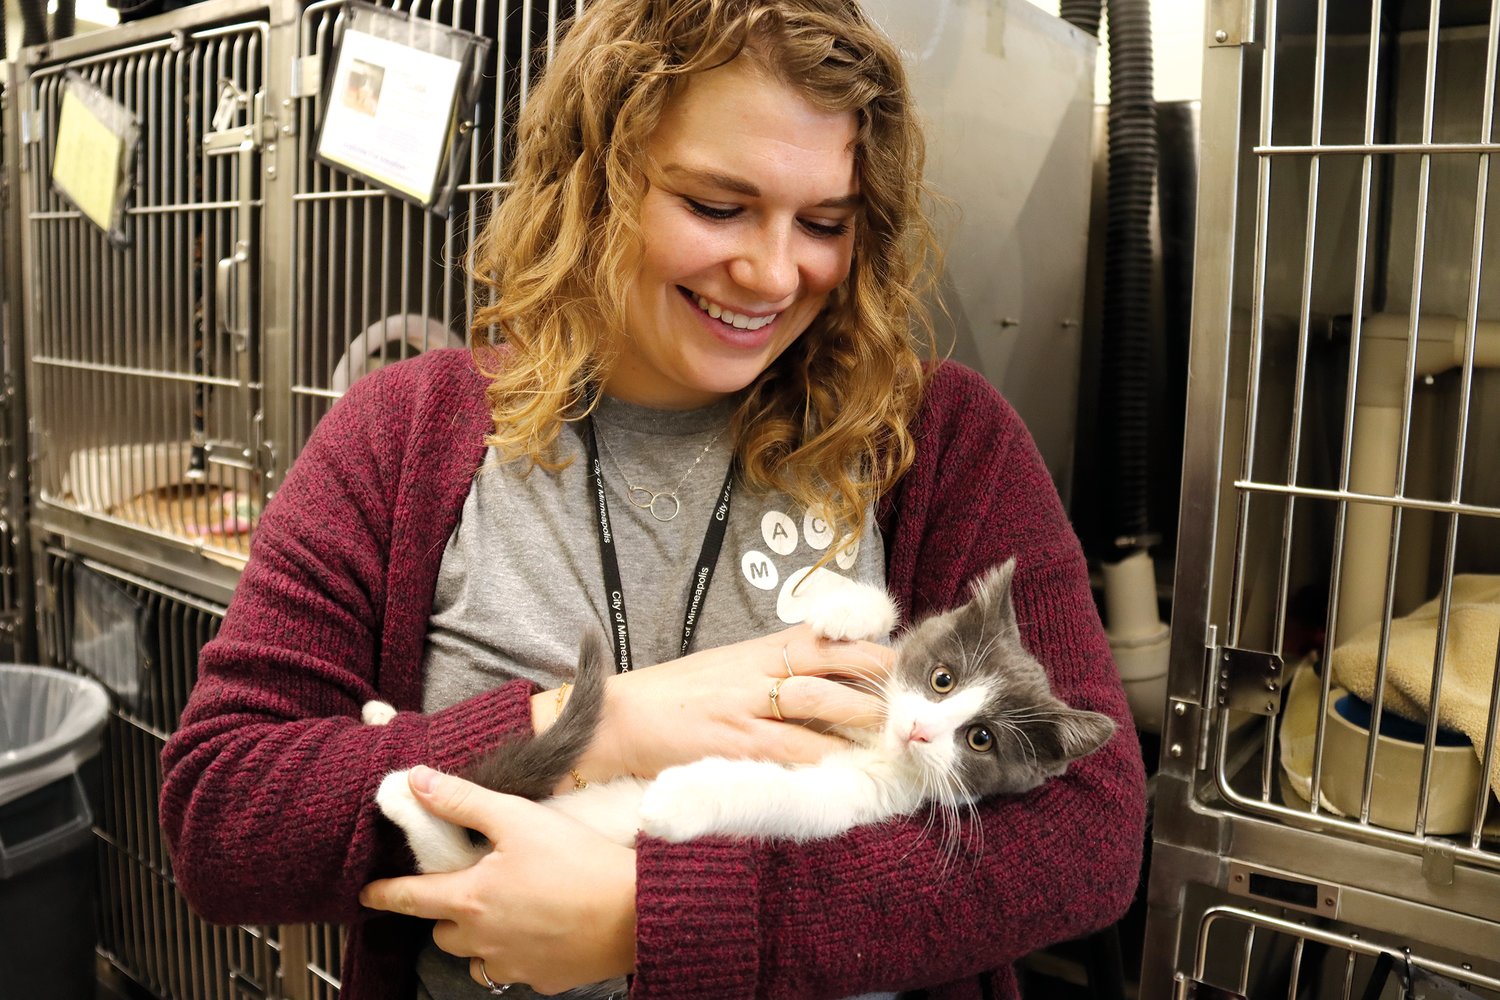 Madison Weissenborn holds three-month-old Llasa prior to a free adoption day event on Dec. 9, 2022 meant to clear out the shelter before Christmas. Weissenborn is the volunteer and community partnership coordinator at Minneapolis Animal Care and Control.  (Photo by Tesha M. Christensen)